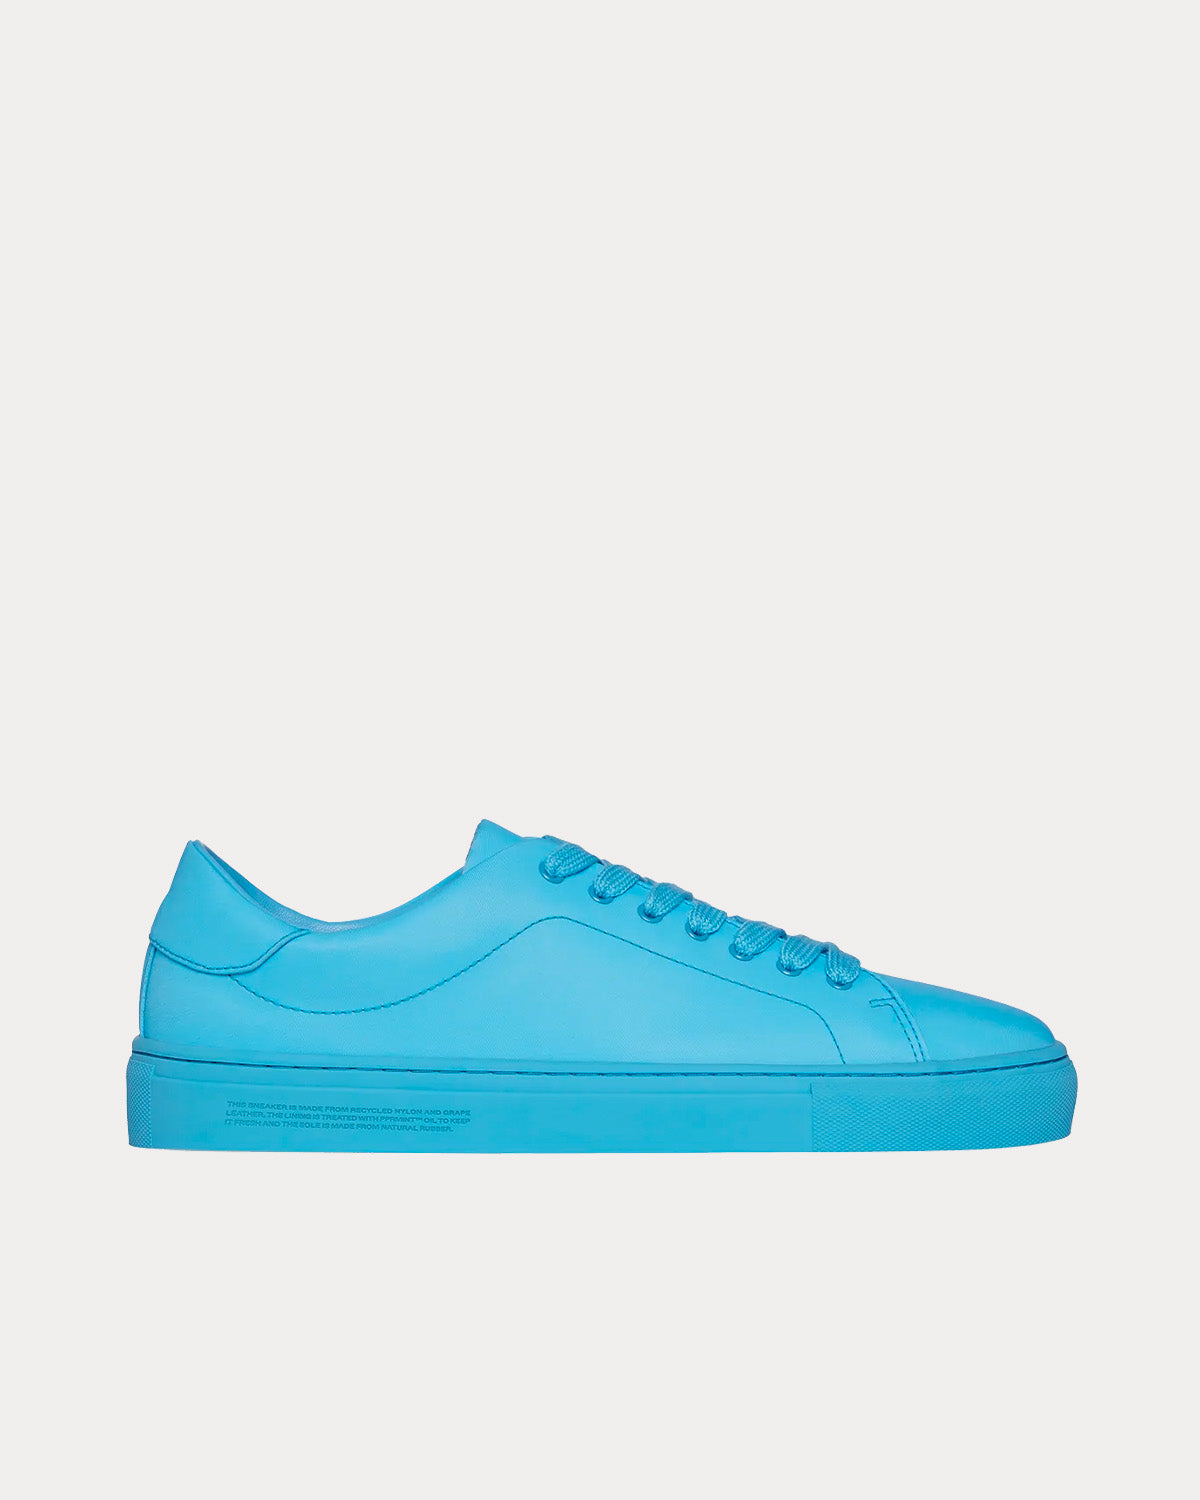 Pangaia - Recycled Nylon Beach Blue Low Top Sneakers